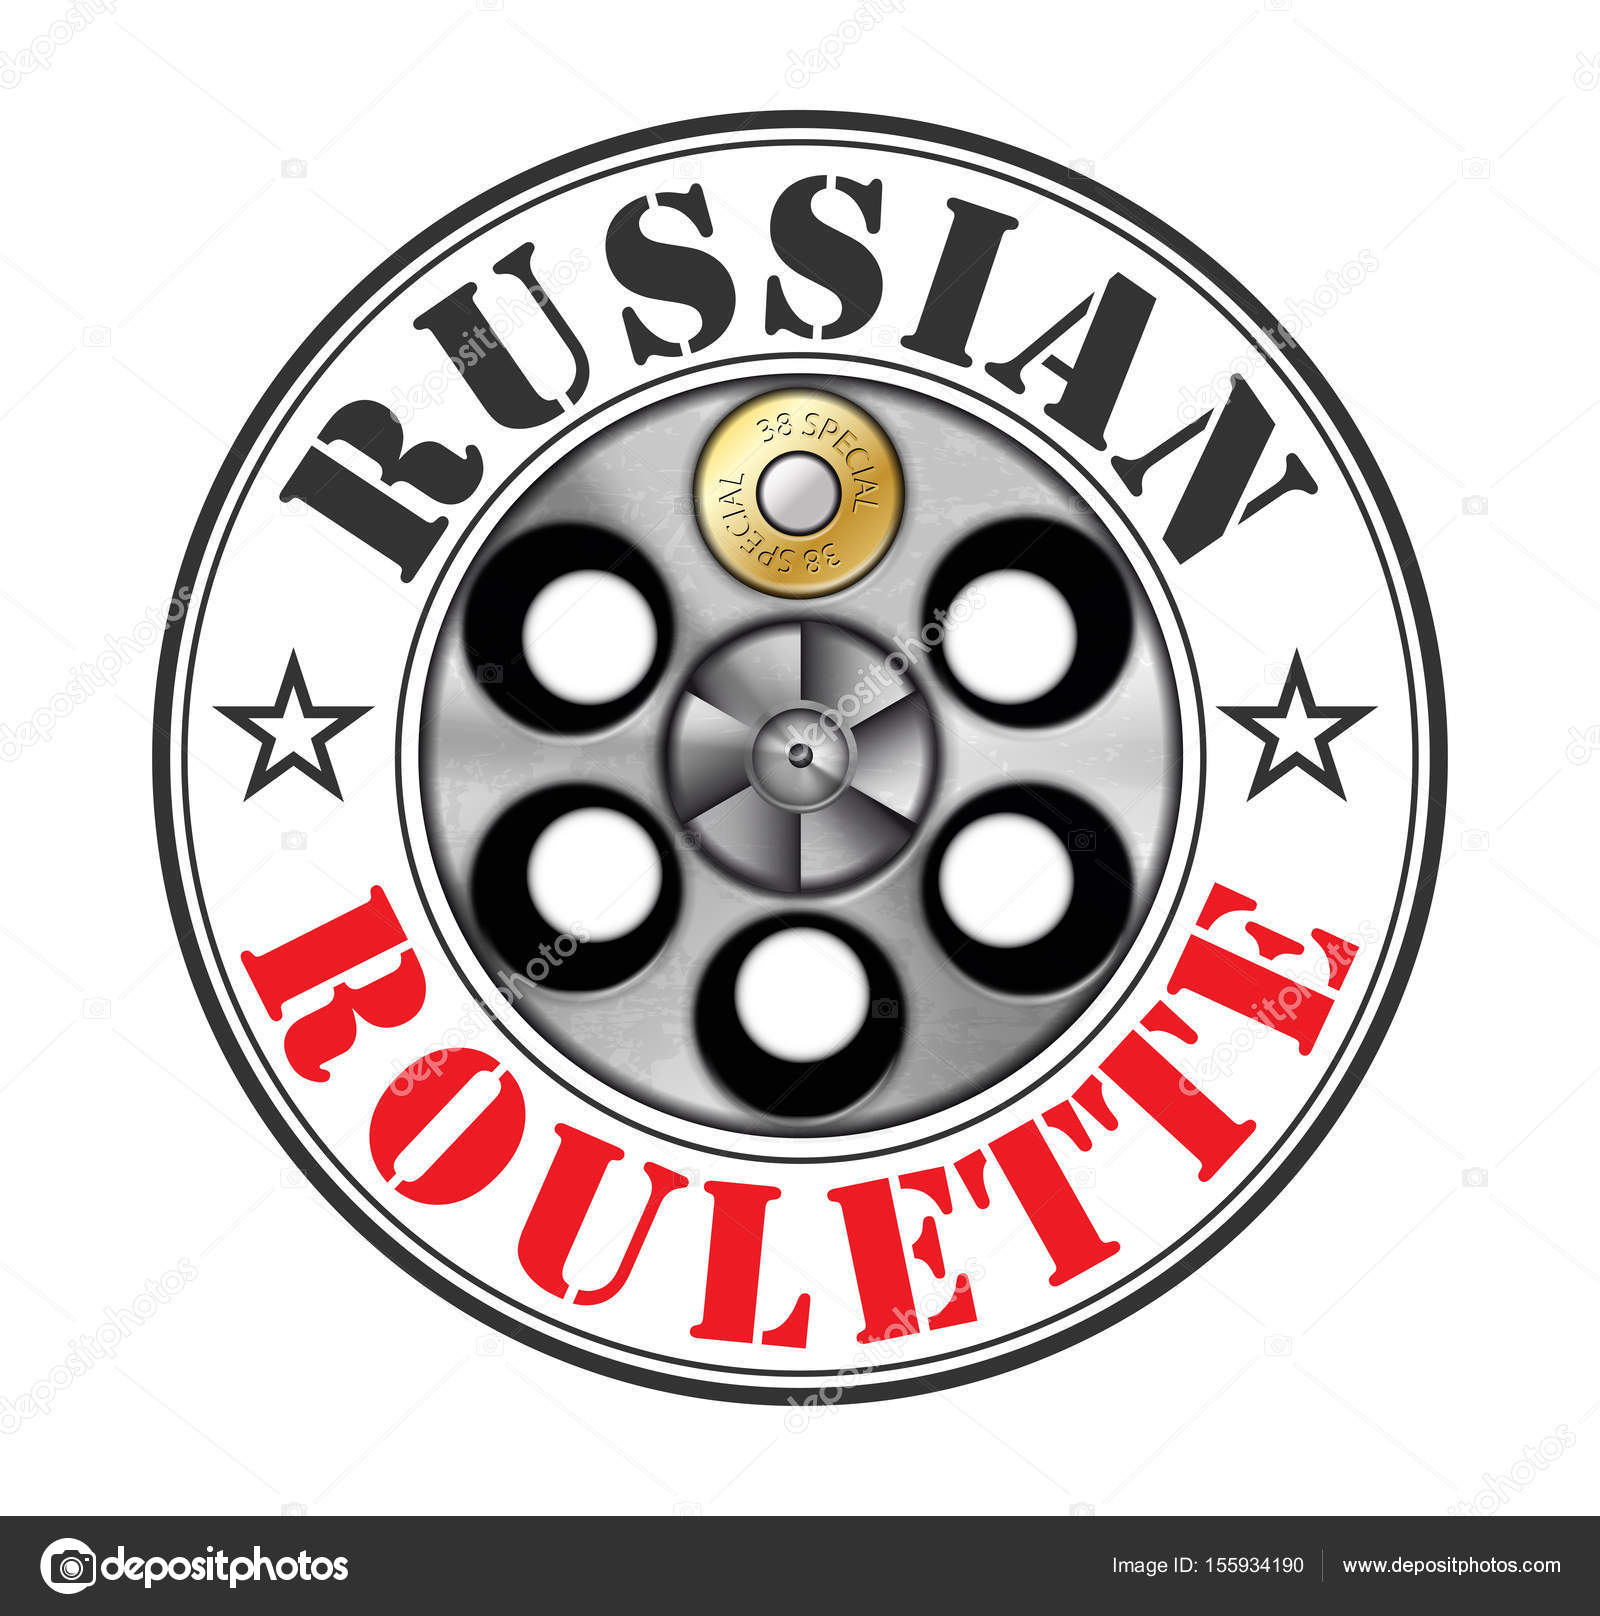 Russian Roulette Images – Browse 245 Stock Photos, Vectors, and